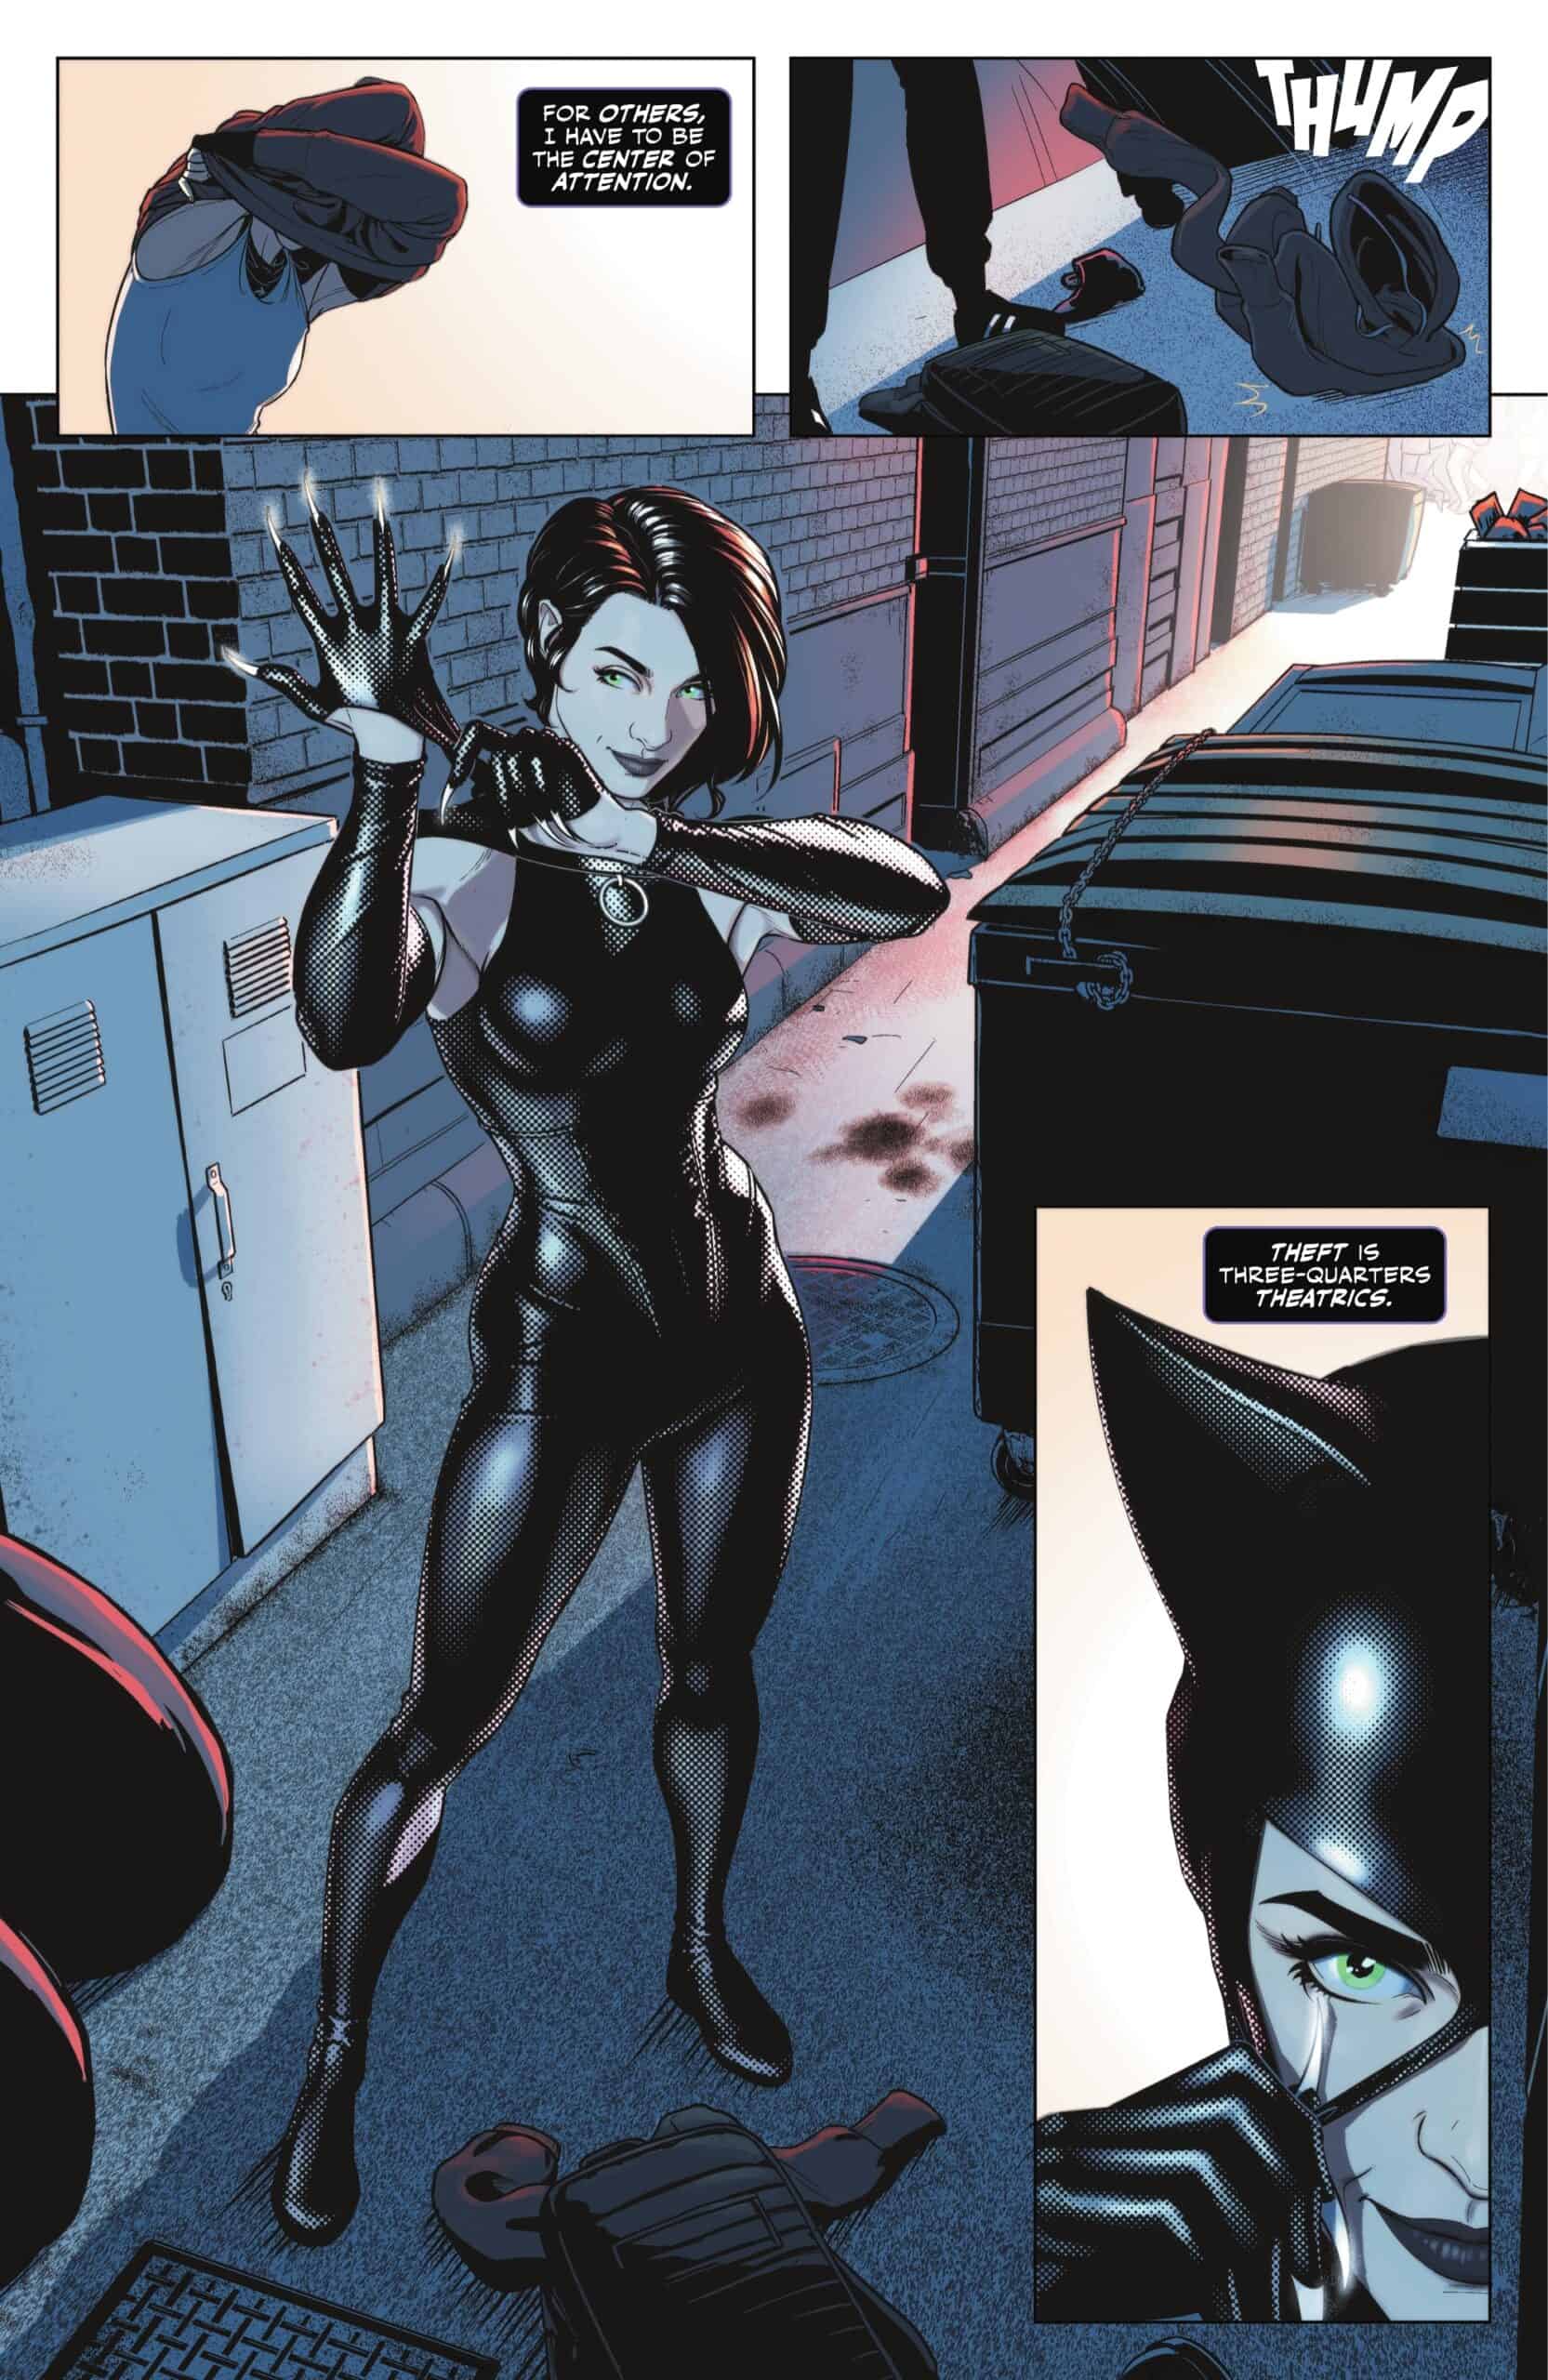 Batman: One Bad Day: Catwoman #1: A.C.A.B. (All Cats Are Beautiful ...